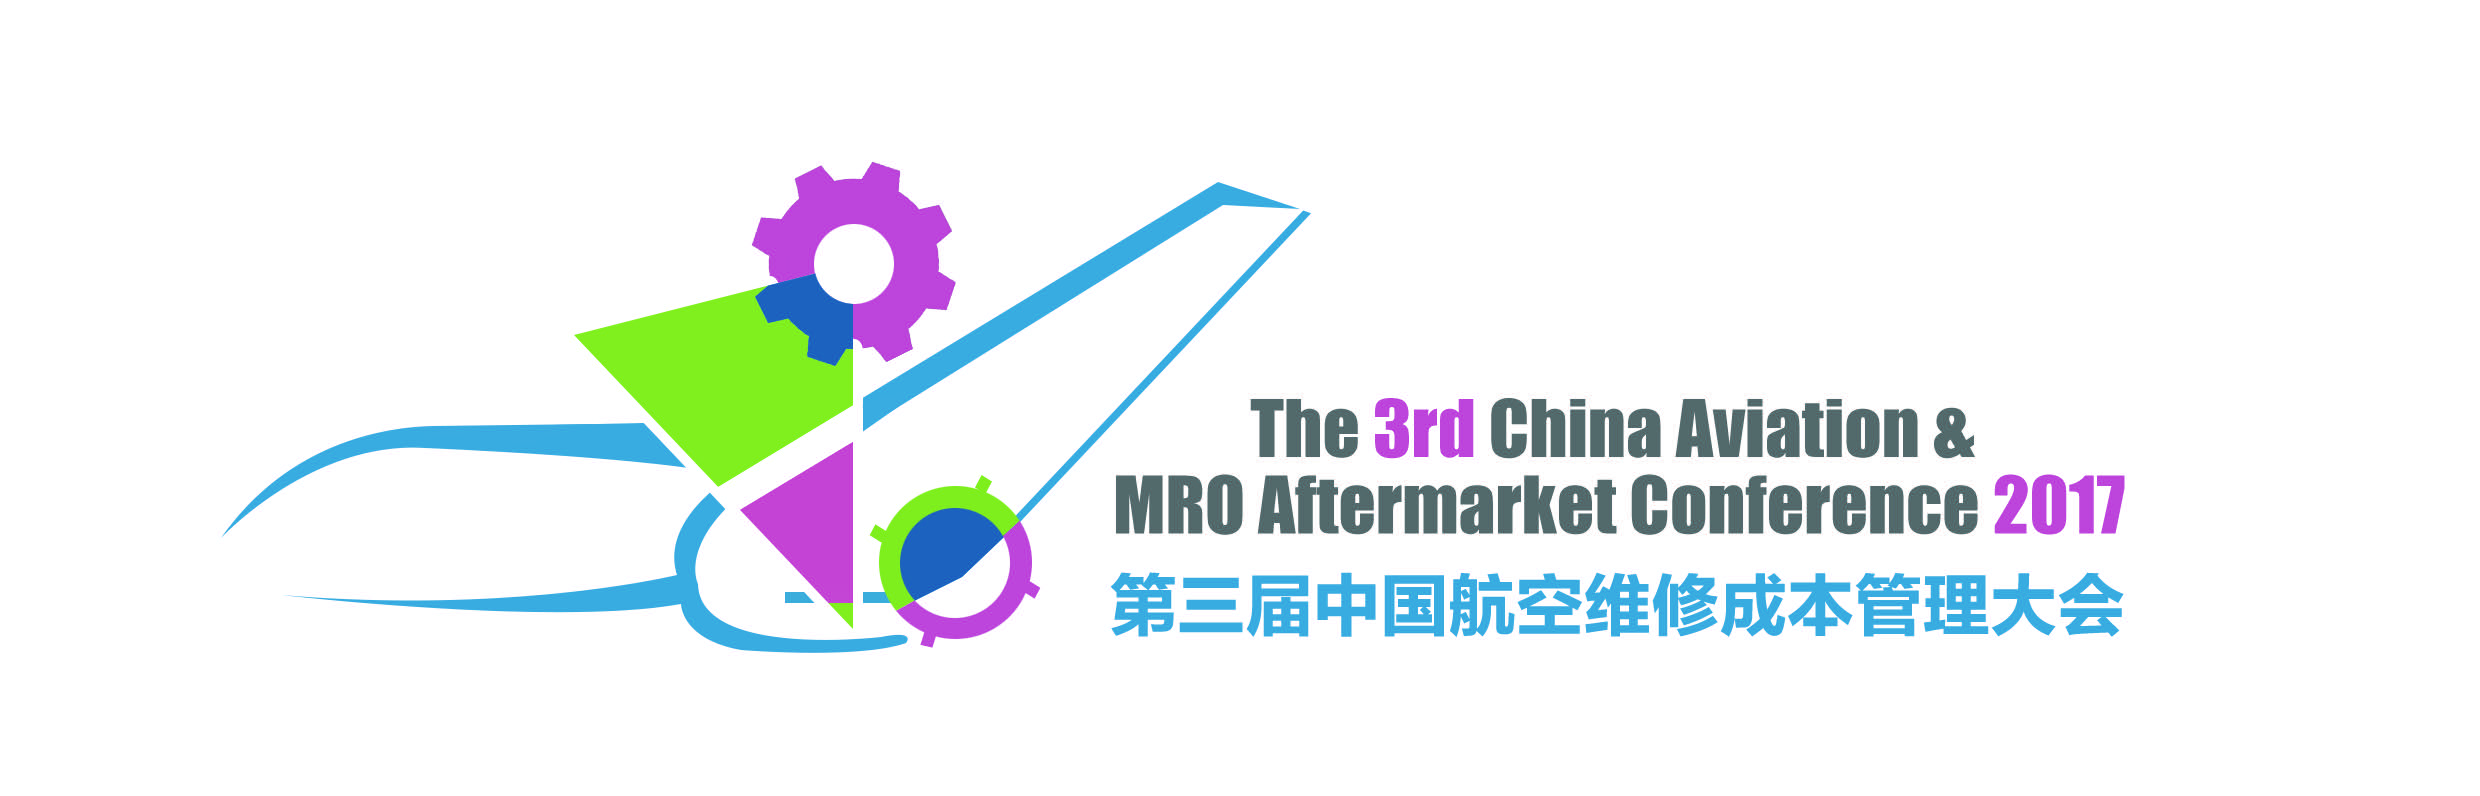 The 3rd China Aviation & MRO Aftermarket Conference 2017 will be held in Shanghai this November